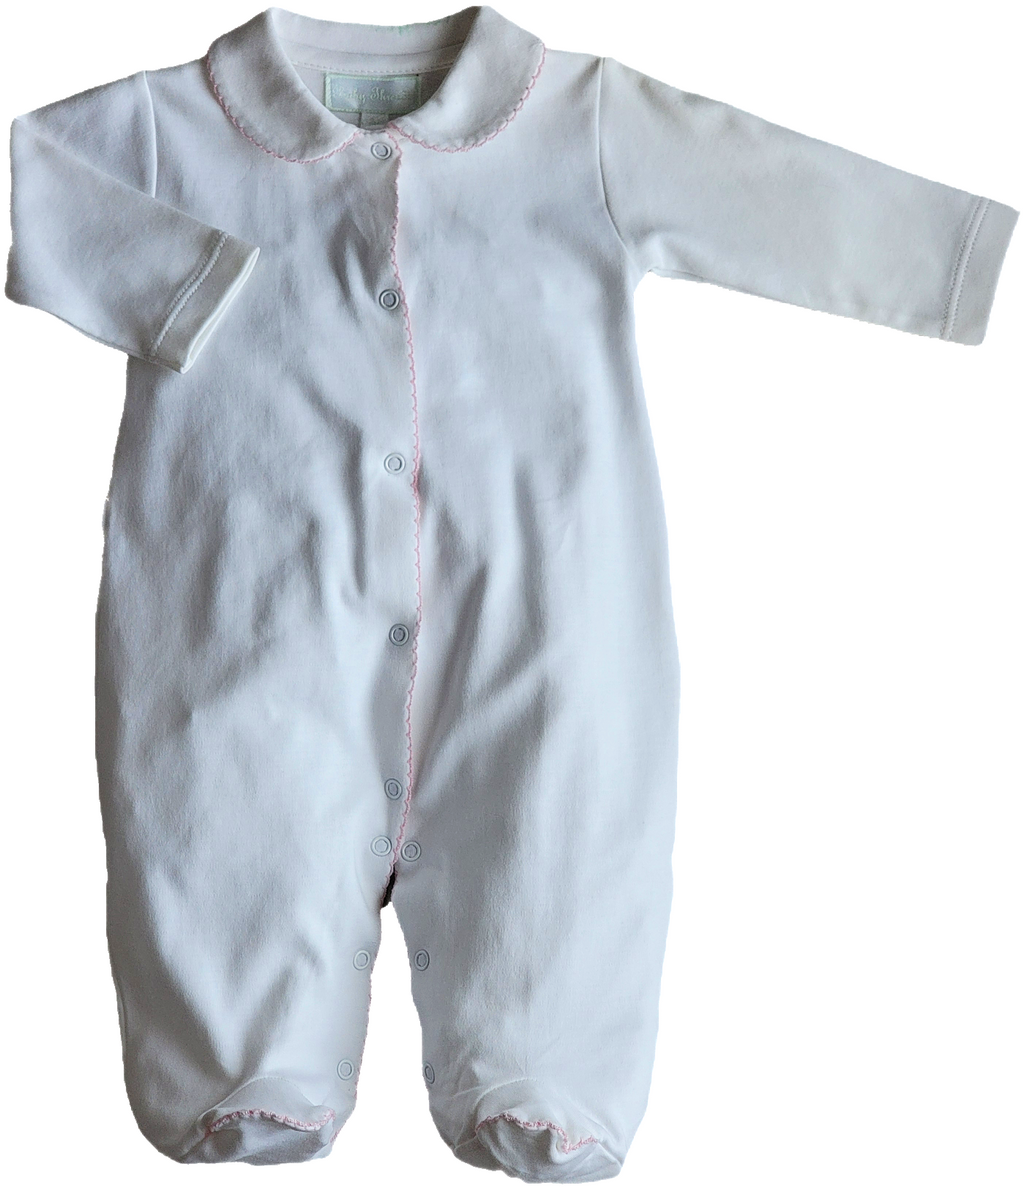 Baby Girl's White Footie with Pink Trim